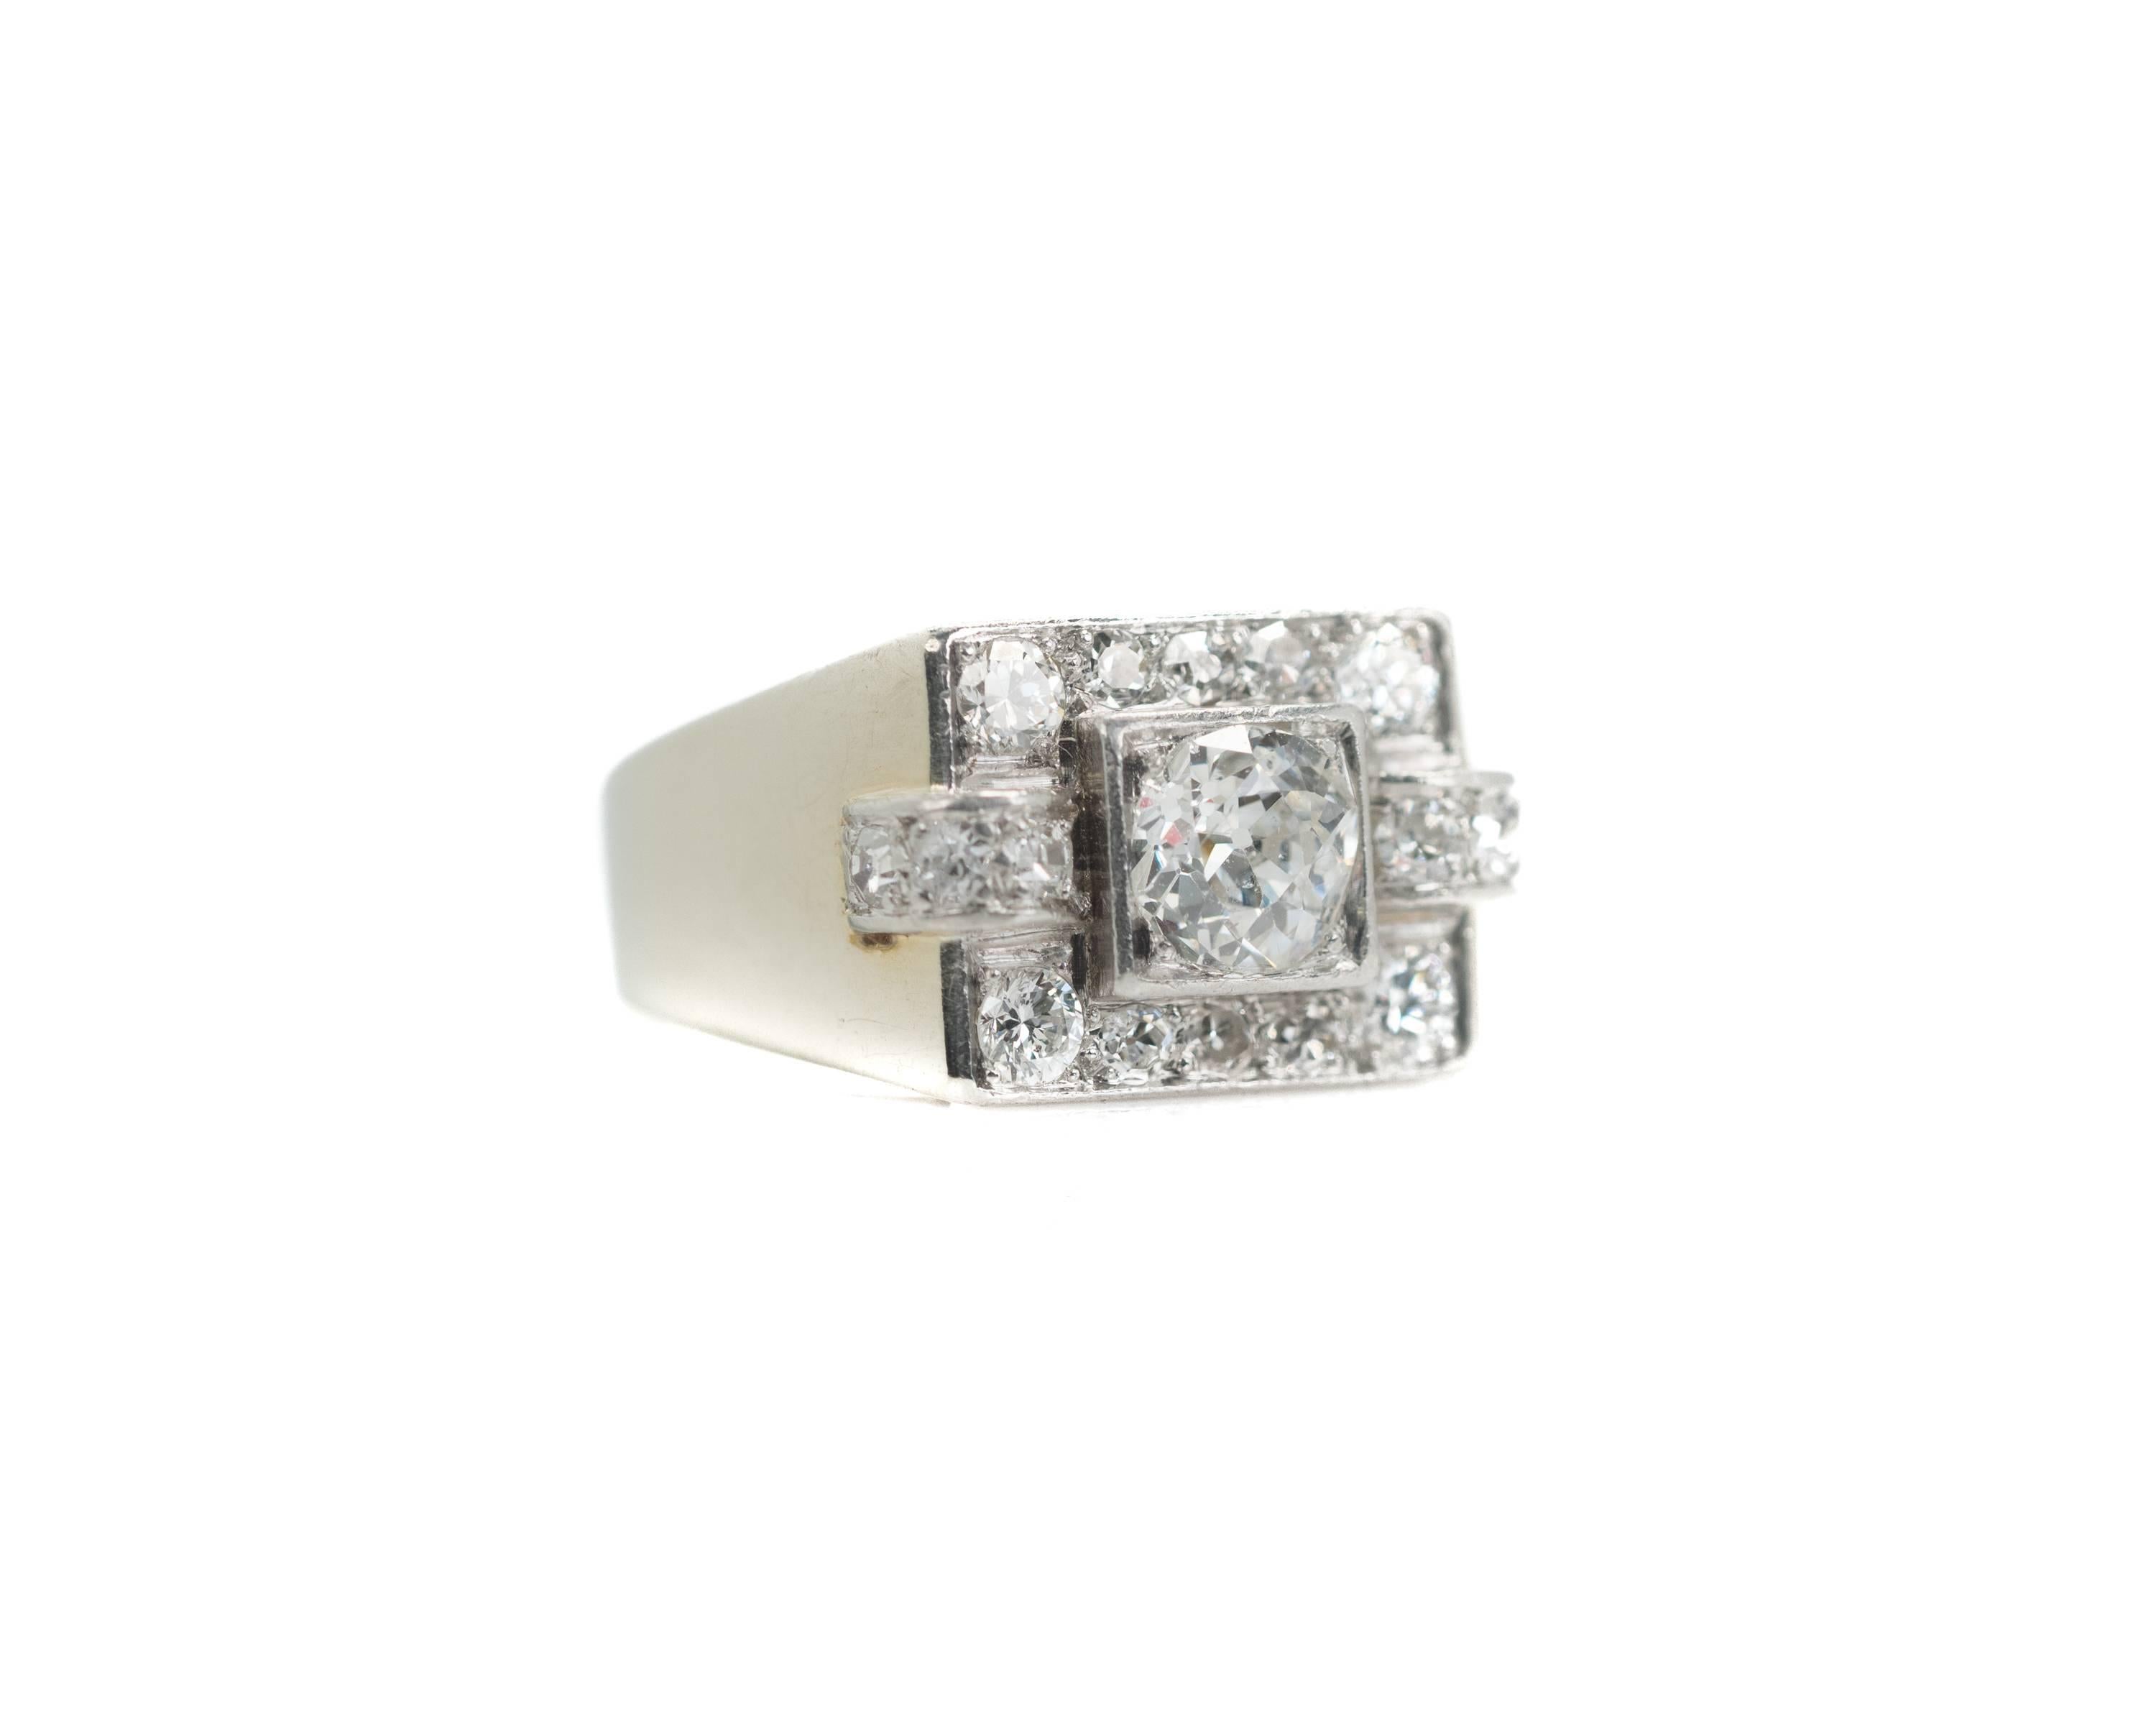 1930s Art Deco 1.0 carat total weight Diamond, 14K White Gold Ring

Features a 0.75 Carat Old Mine Diamond center stone. The round center stone is prong set in a square setting. A row of round Single cut Diamonds sits above and below the center